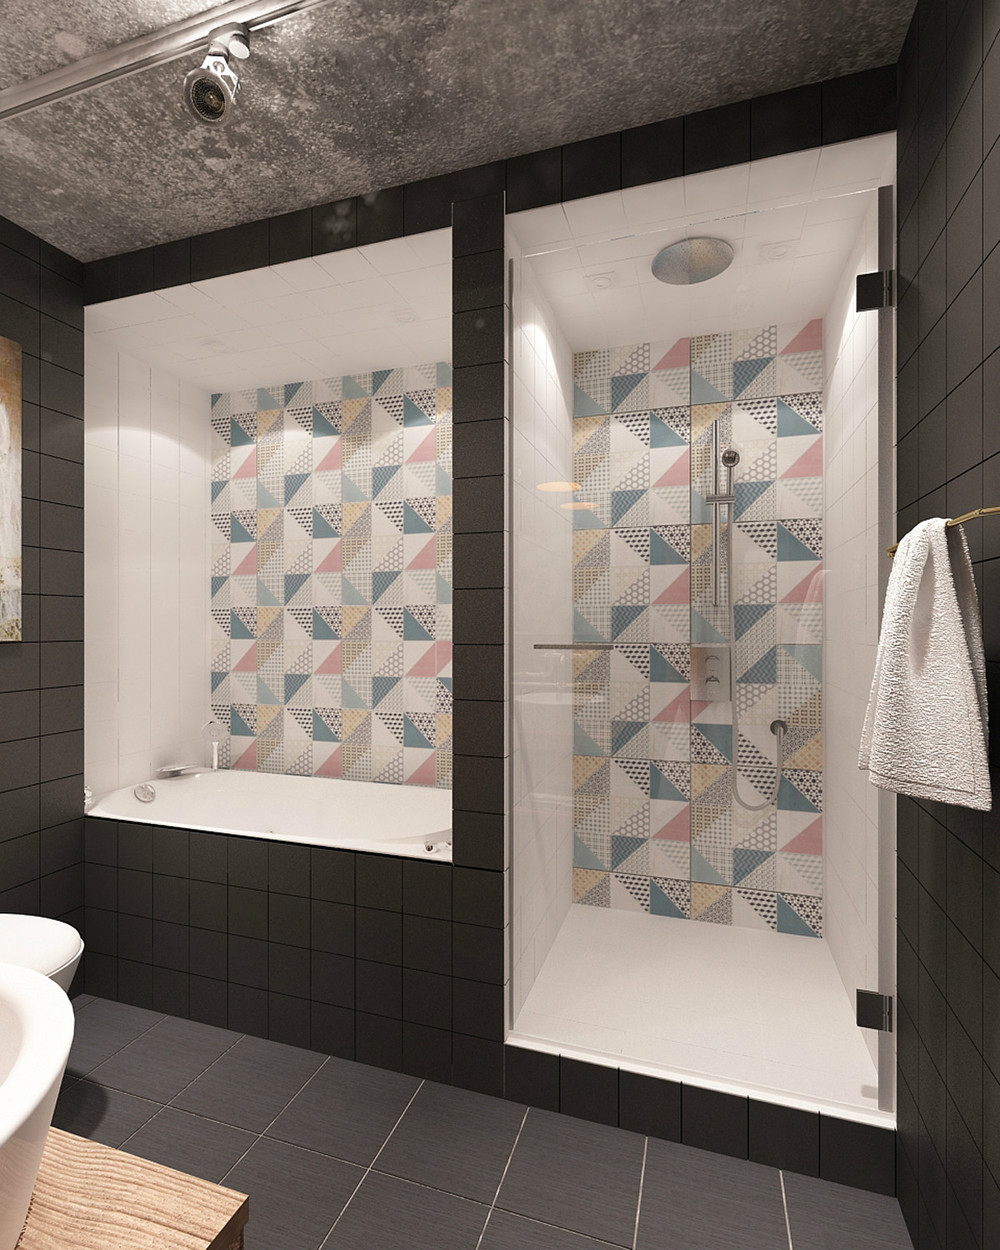 Design of small bathroom tiles "width =" 1000 "height =" 1250 "srcset =" https://mileray.com/wp-content/uploads/2020/05/1588516382_296_Best-Ideas-To-Create-Simple-Bathroom-Designs-With-Variety-of.jpg 1000w, https://mileray.com / wp-content / uploads / 2016/09 / ART-UGOL-240x300.jpg 240w, https://mileray.com/wp-content/uploads/2016/09/ART-UGOL-768x960.jpg 768w, https: / / mileray.com/wp-content/uploads/2016/09/ART-UGOL-819x1024.jpg 819w, https://mileray.com/wp-content/uploads/2016/09/ART-UGOL-696x870.jpg 696w, https://mileray.com/wp-content/uploads/2016/09/ART-UGOL-336x420.jpg 336w "sizes =" (maximum width: 1000px) 100vw, 1000px